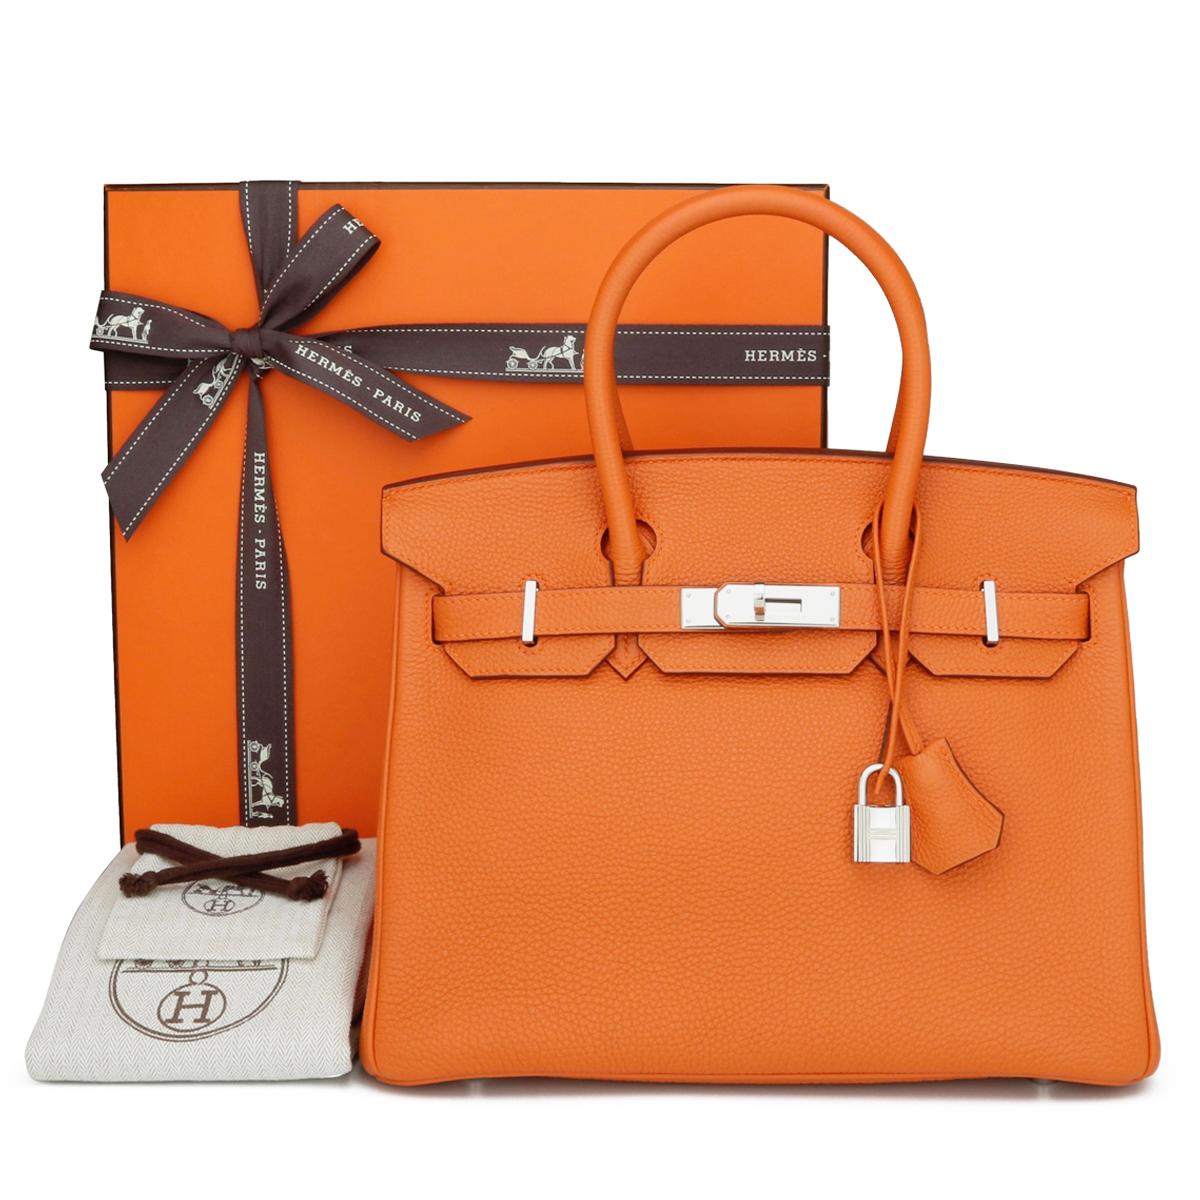 Hermès Birkin Bag 30cm Classic Orange Togo Leather with Palladium Hardware Stamp M_Year 2009.

This bag is still in excellent condition. The leather still smells fresh and retains its original shape. The hardware is still very shiny.

A truly